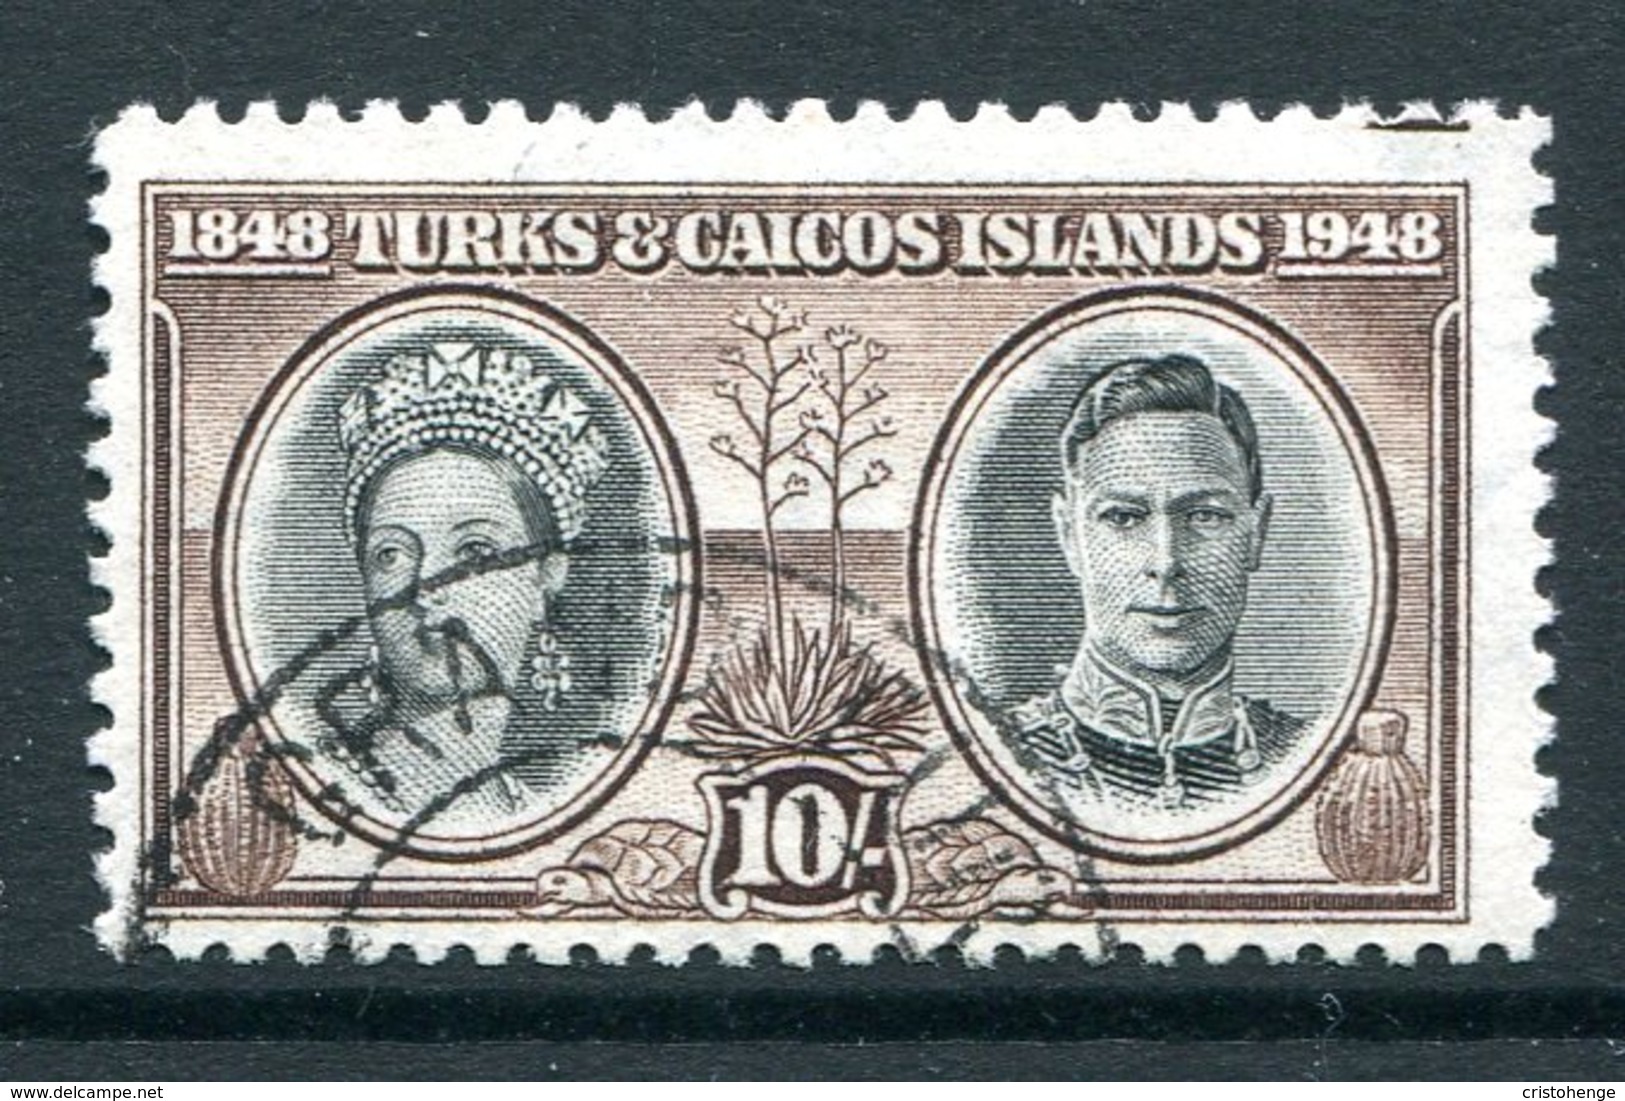 Turks And Caicos Islands 1948 KGVI Centenary Of Separation Of Bahamas - 10/- Value Used (SG 216) - Turks And Caicos